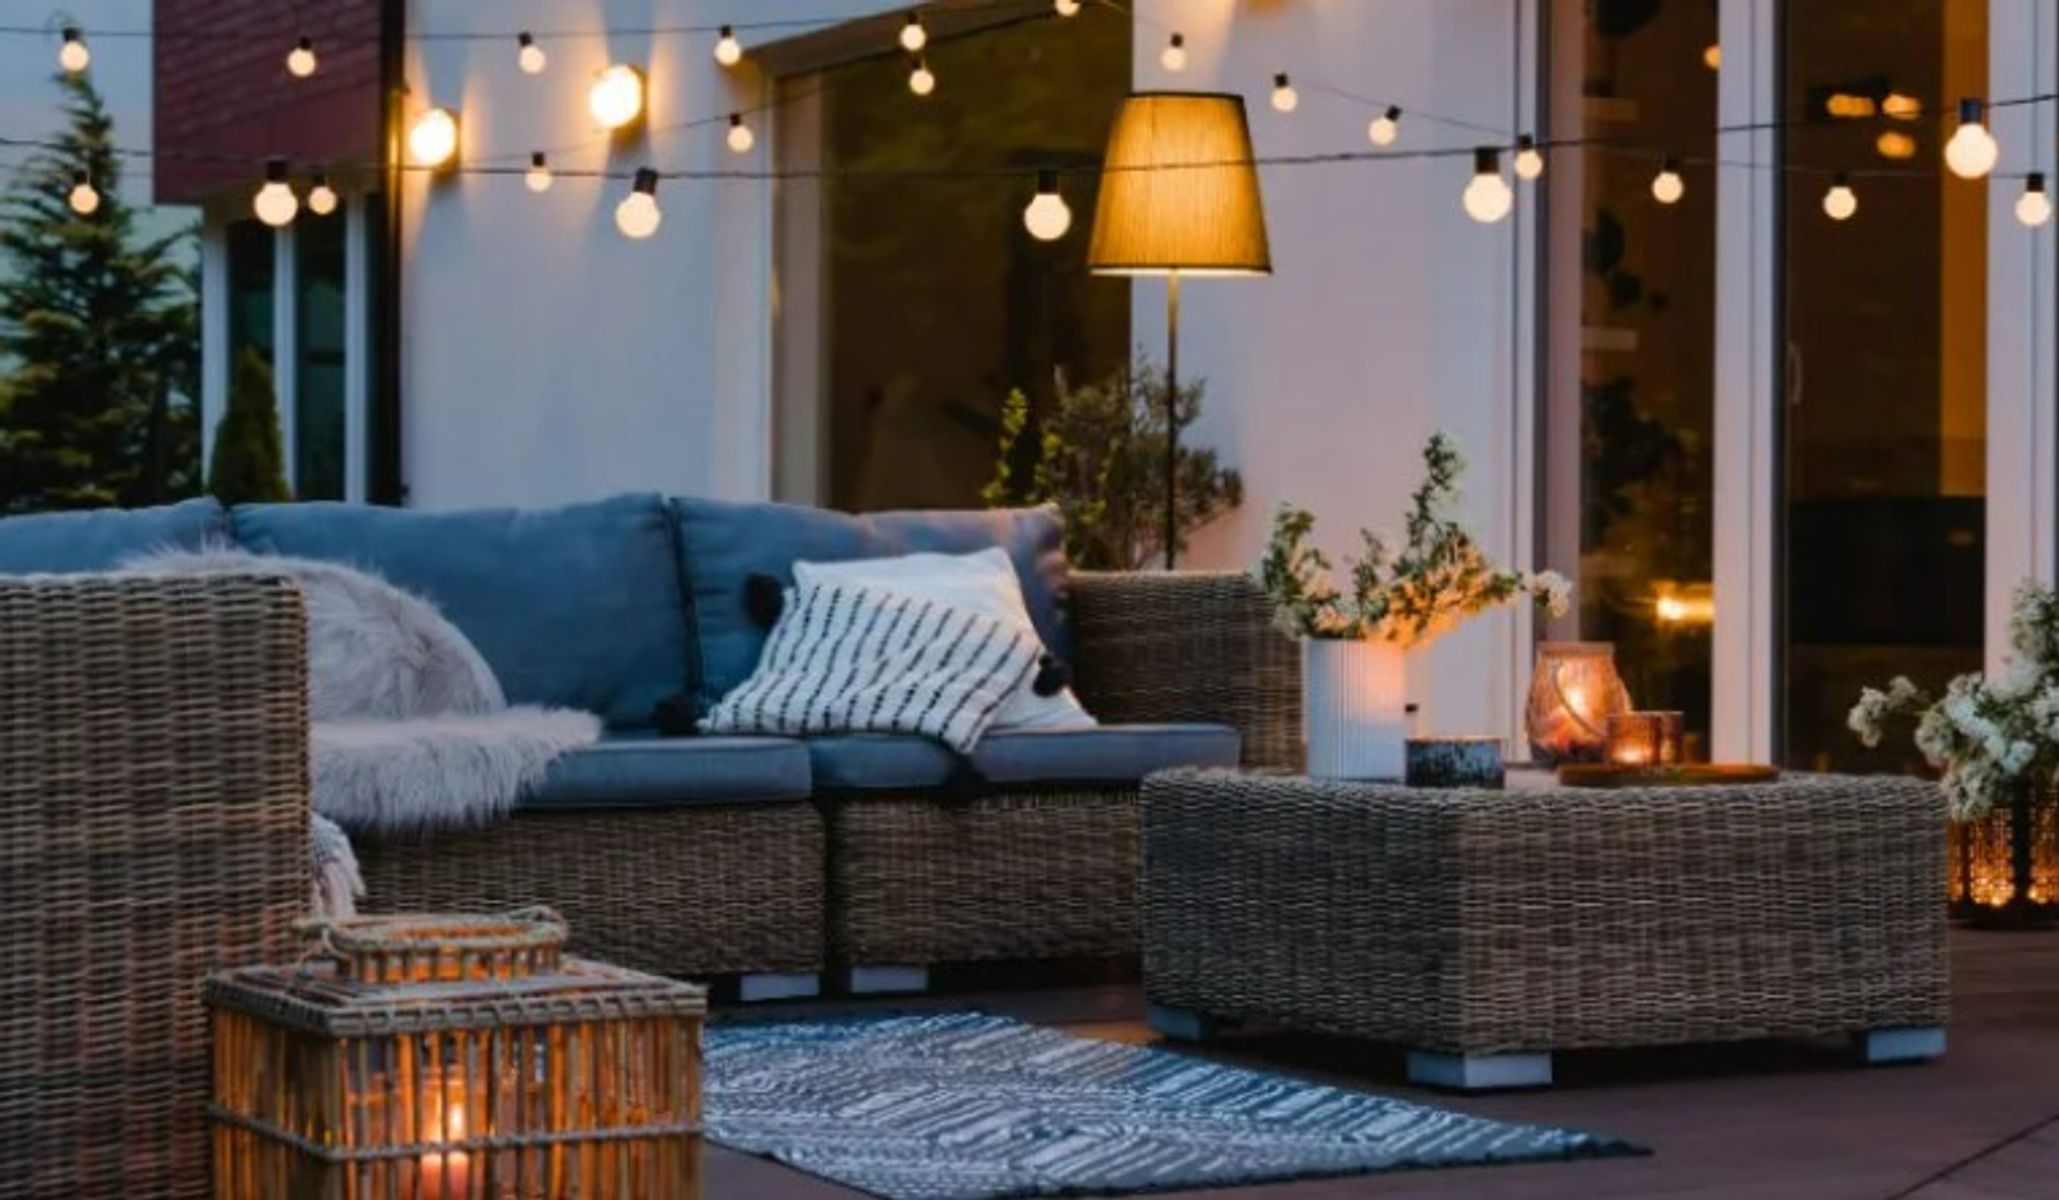 Tips for styling your outdoor spaces